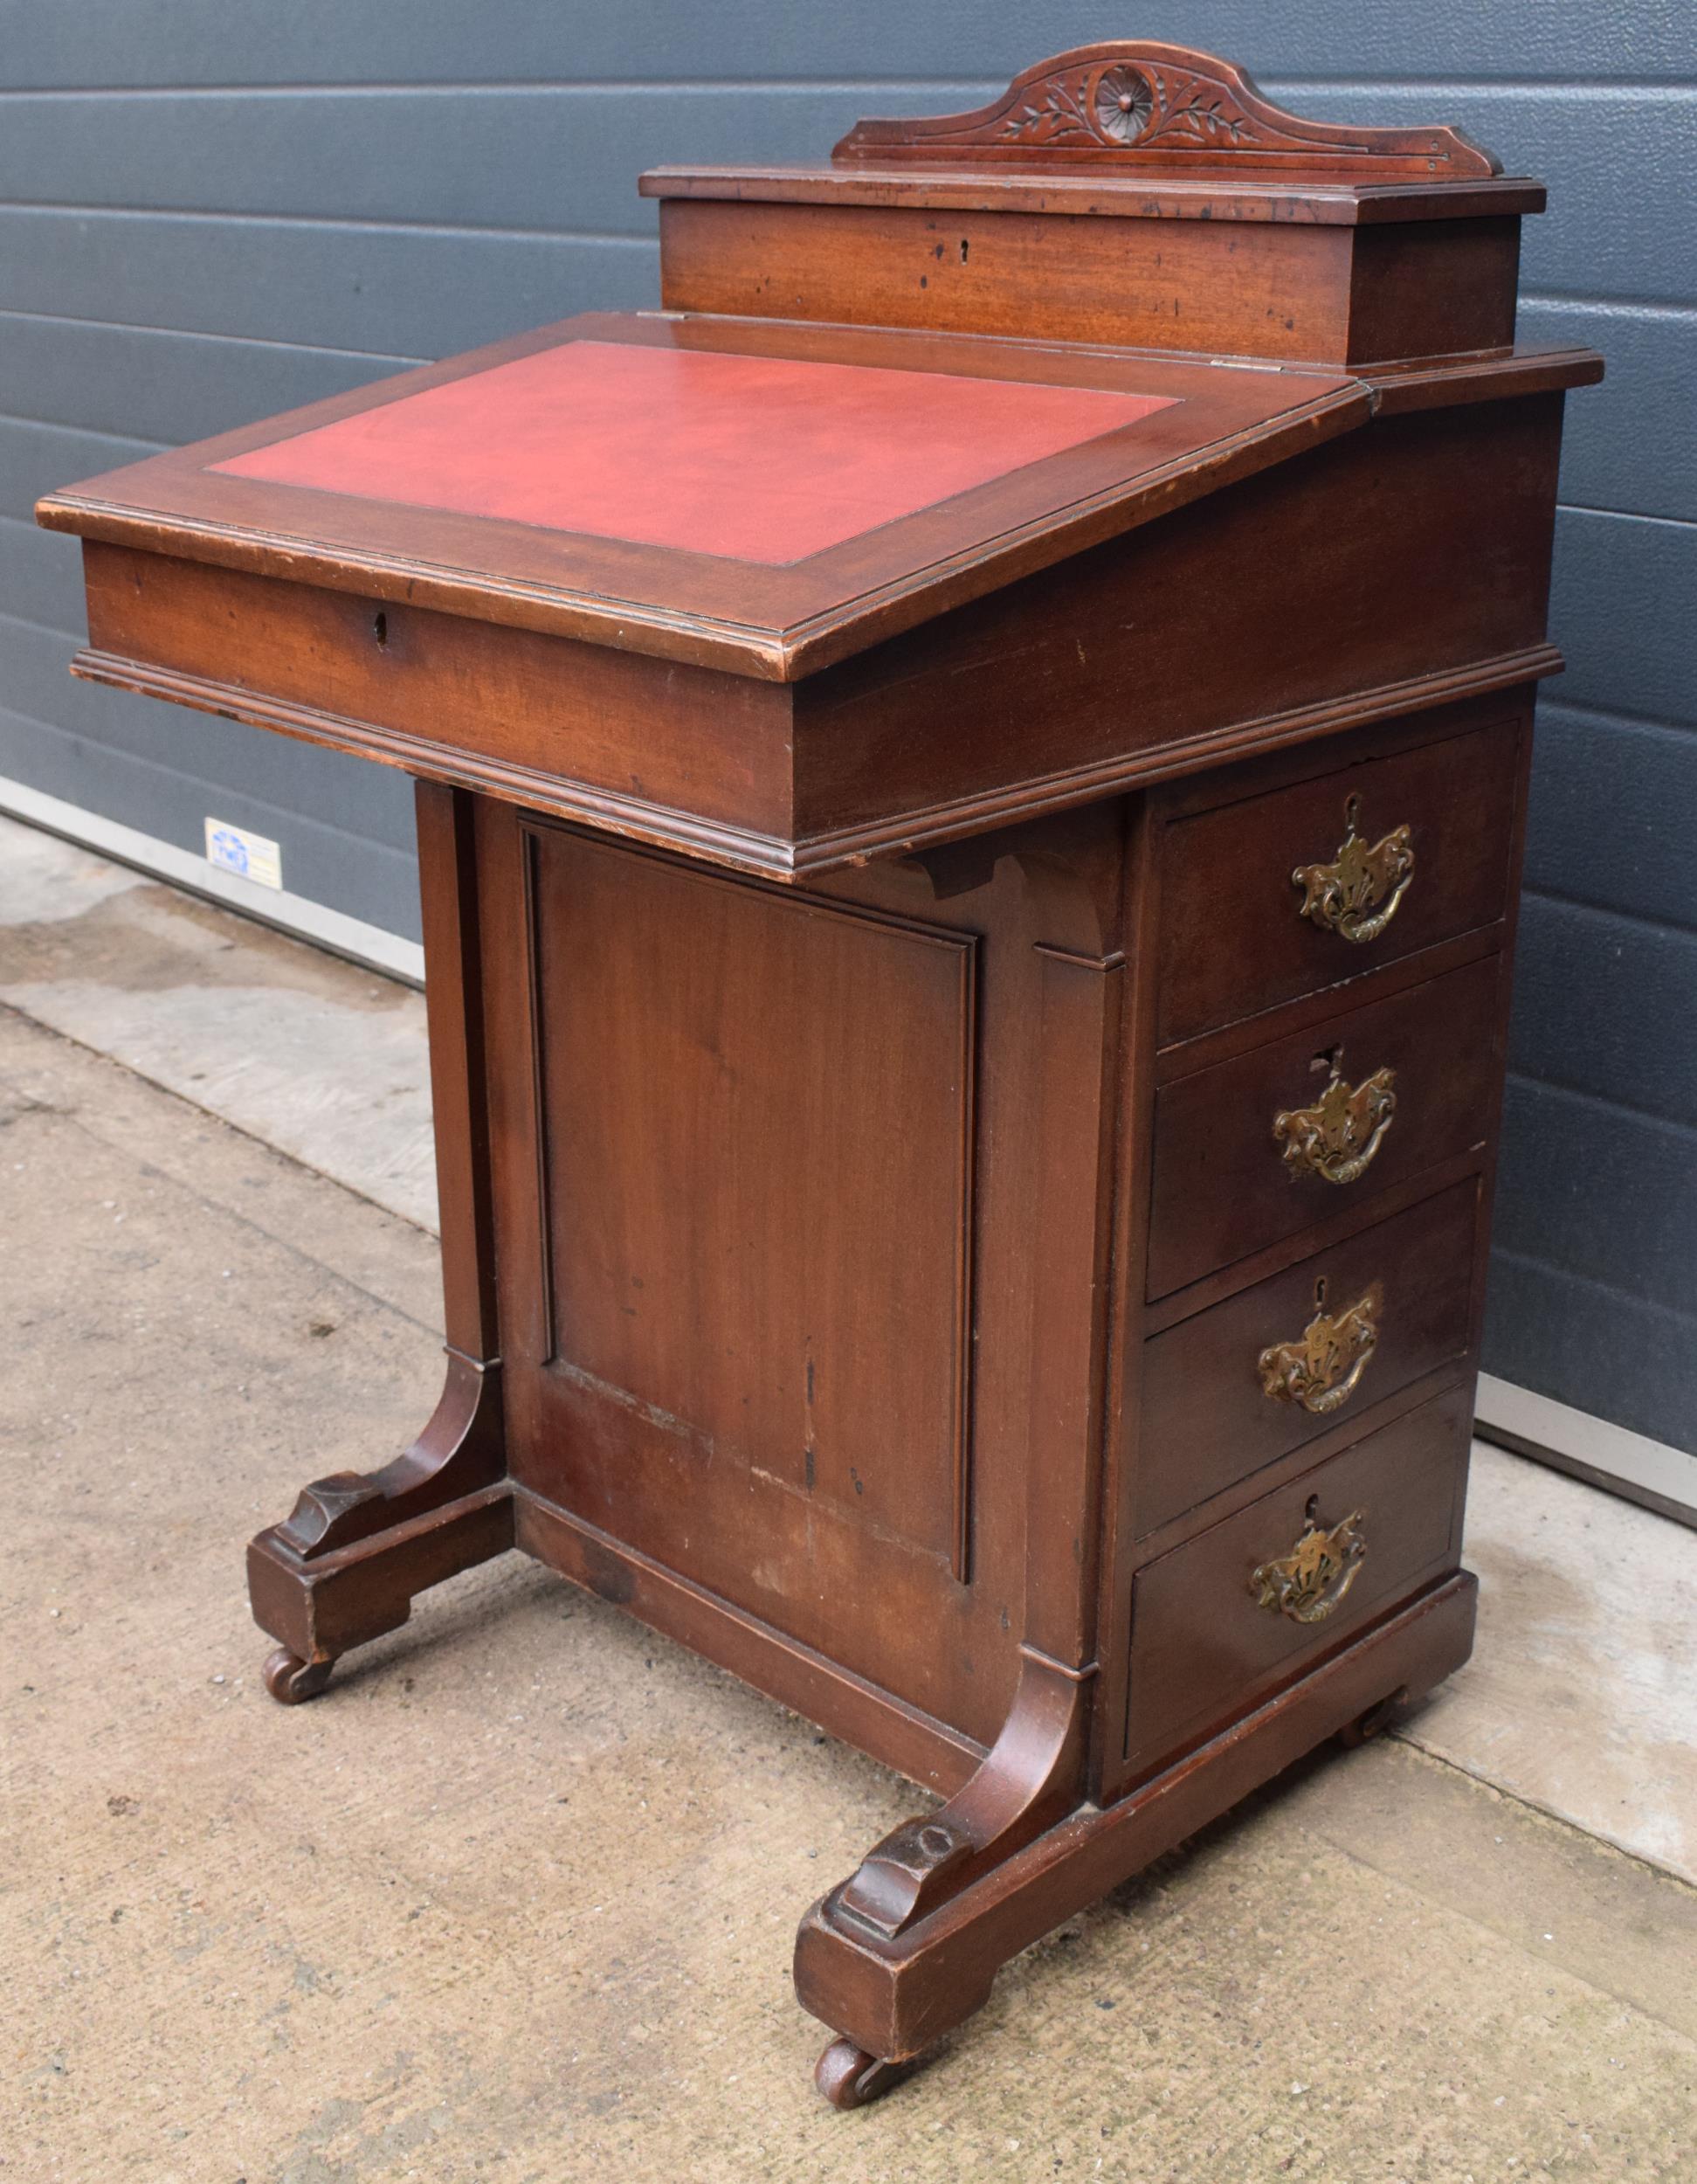 Edwardian Davenport desk with red leather inset and imitation drawers to left-hand side. 92cm